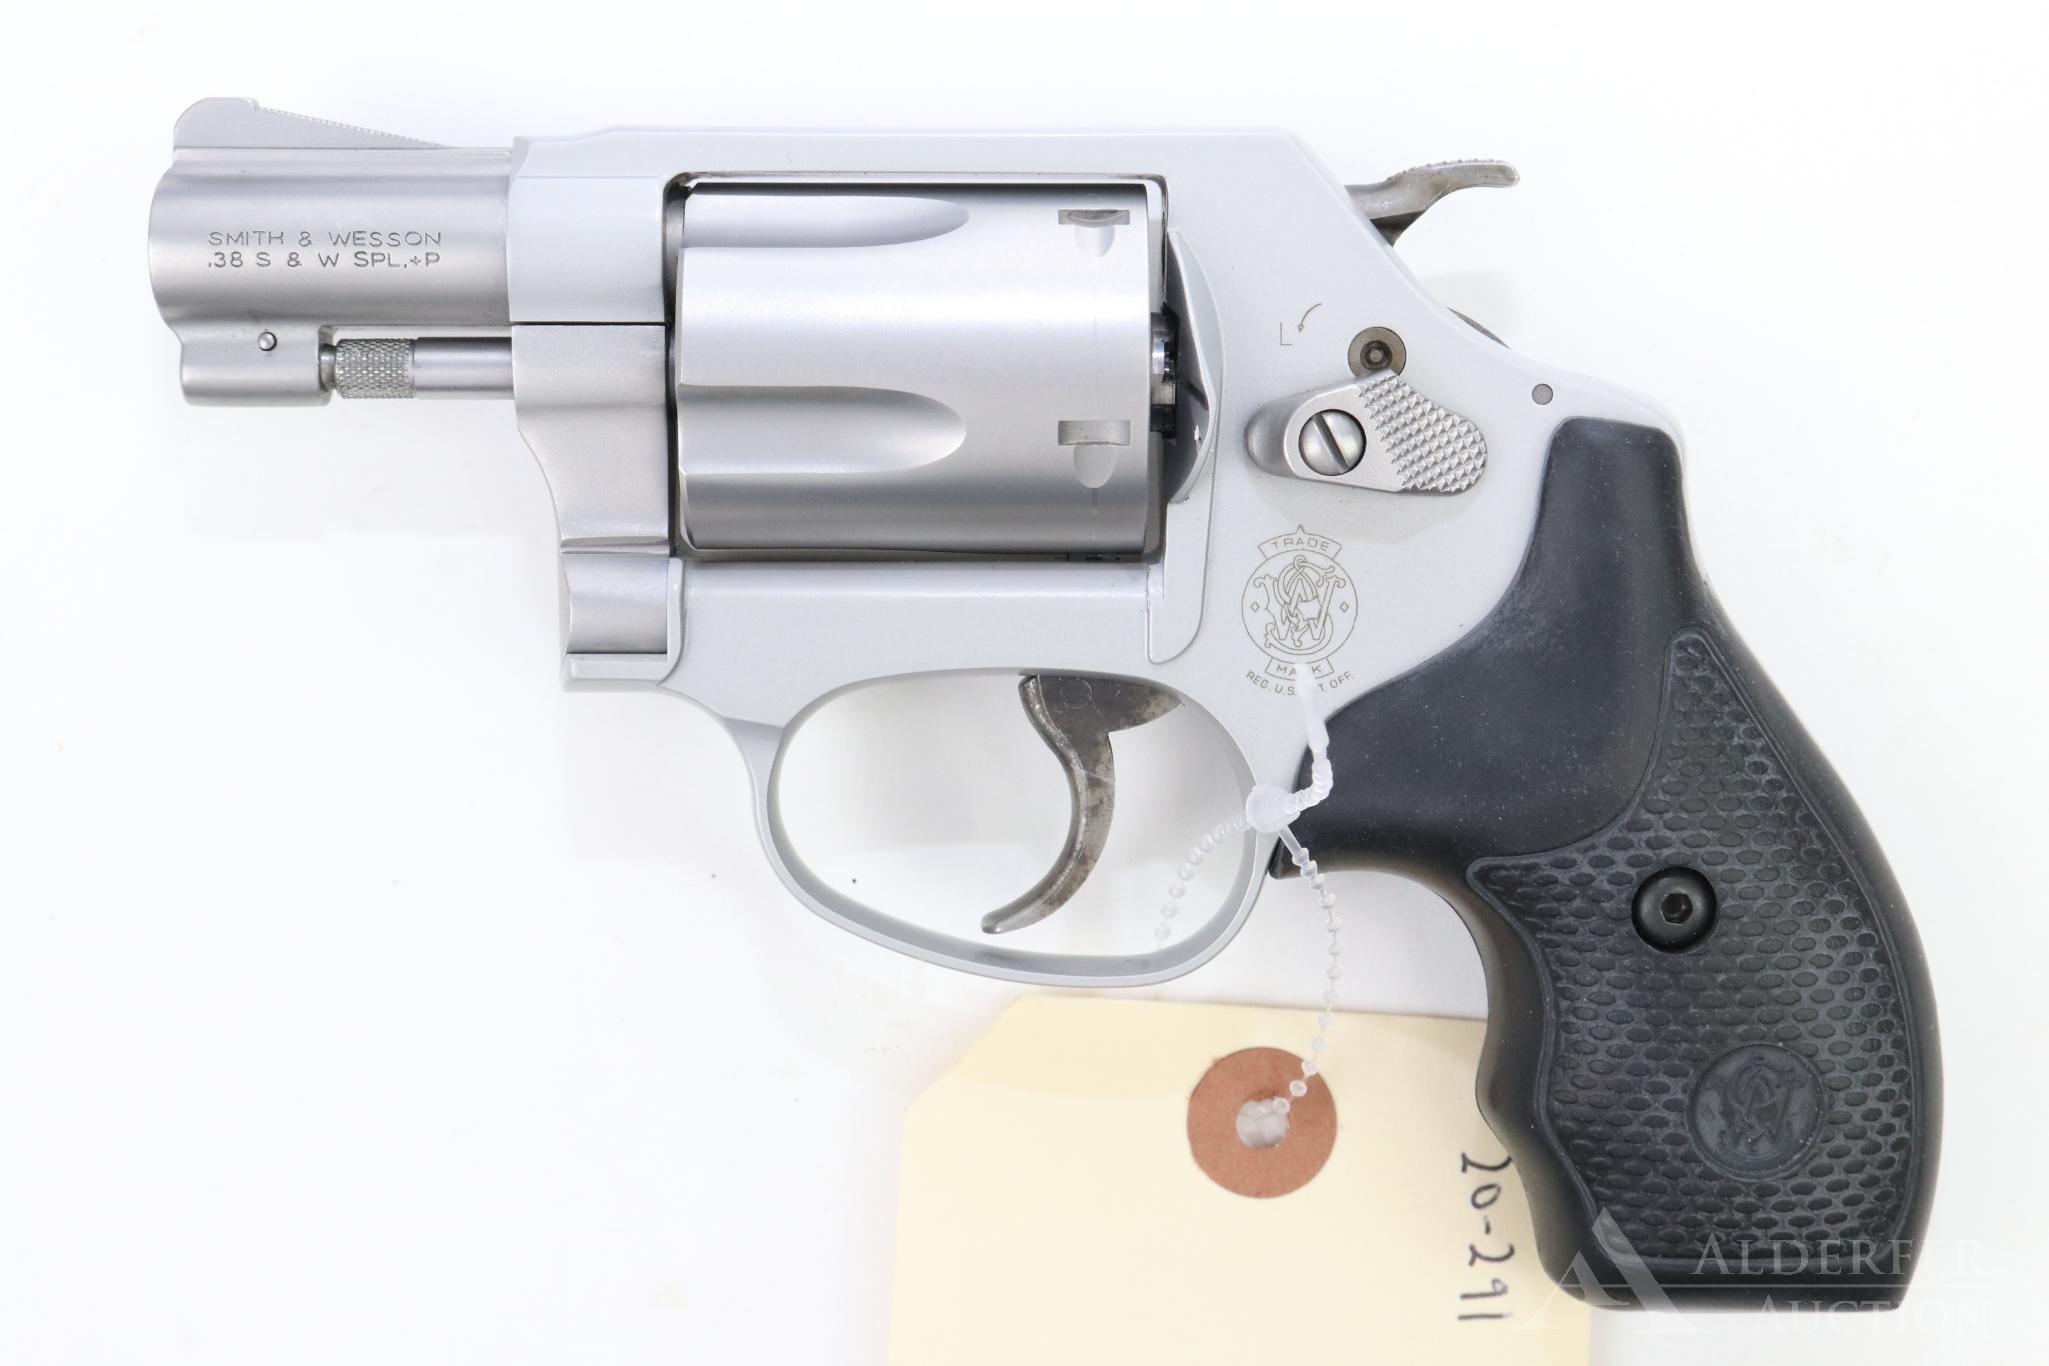 Smith & Wesson 637-2 Airweight double action revolver.